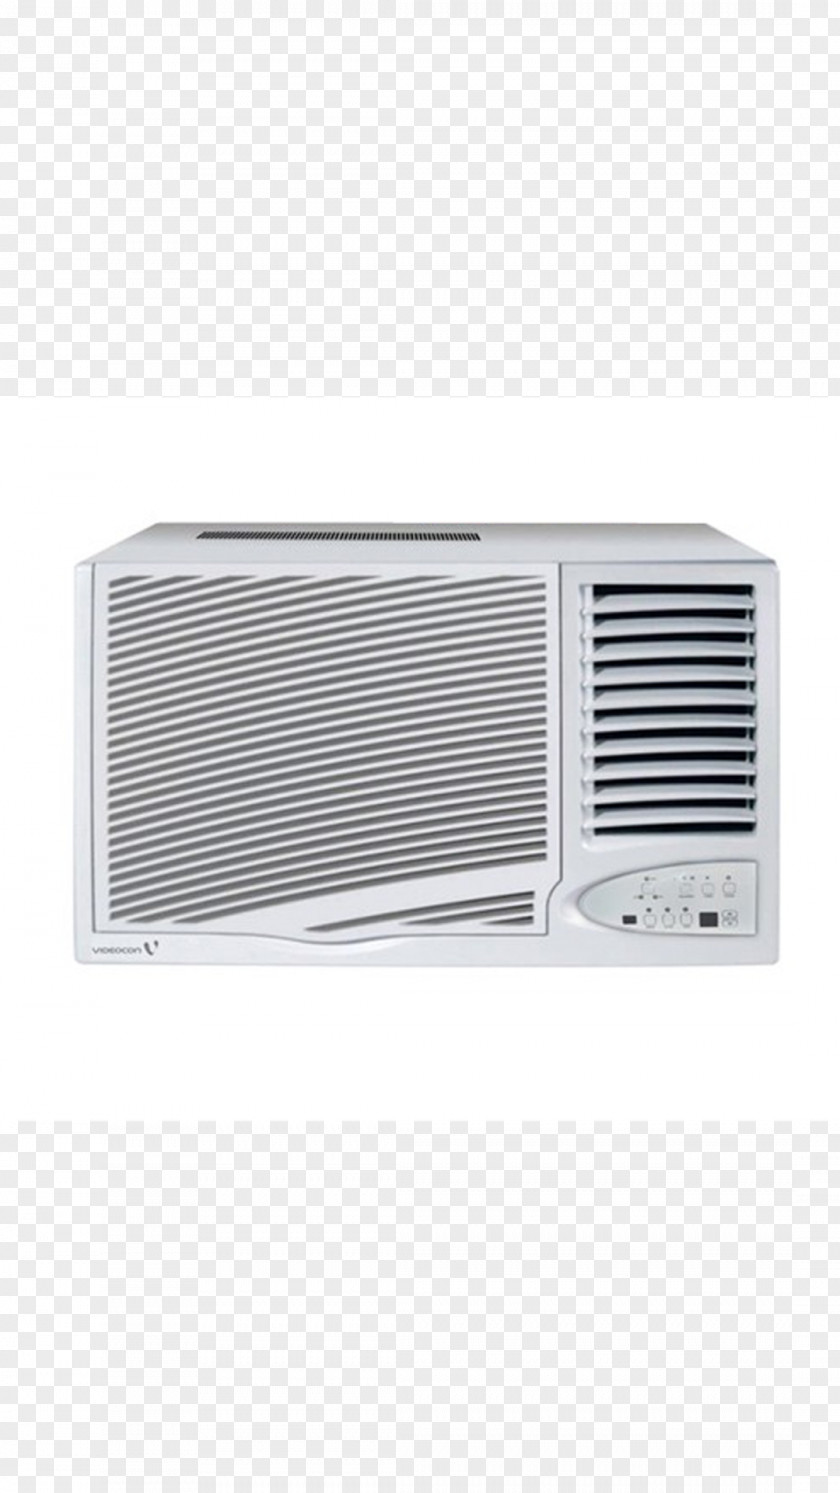 Conditioner Air Conditioning Home Appliance Ahmedabad Refrigerator Videocon PNG